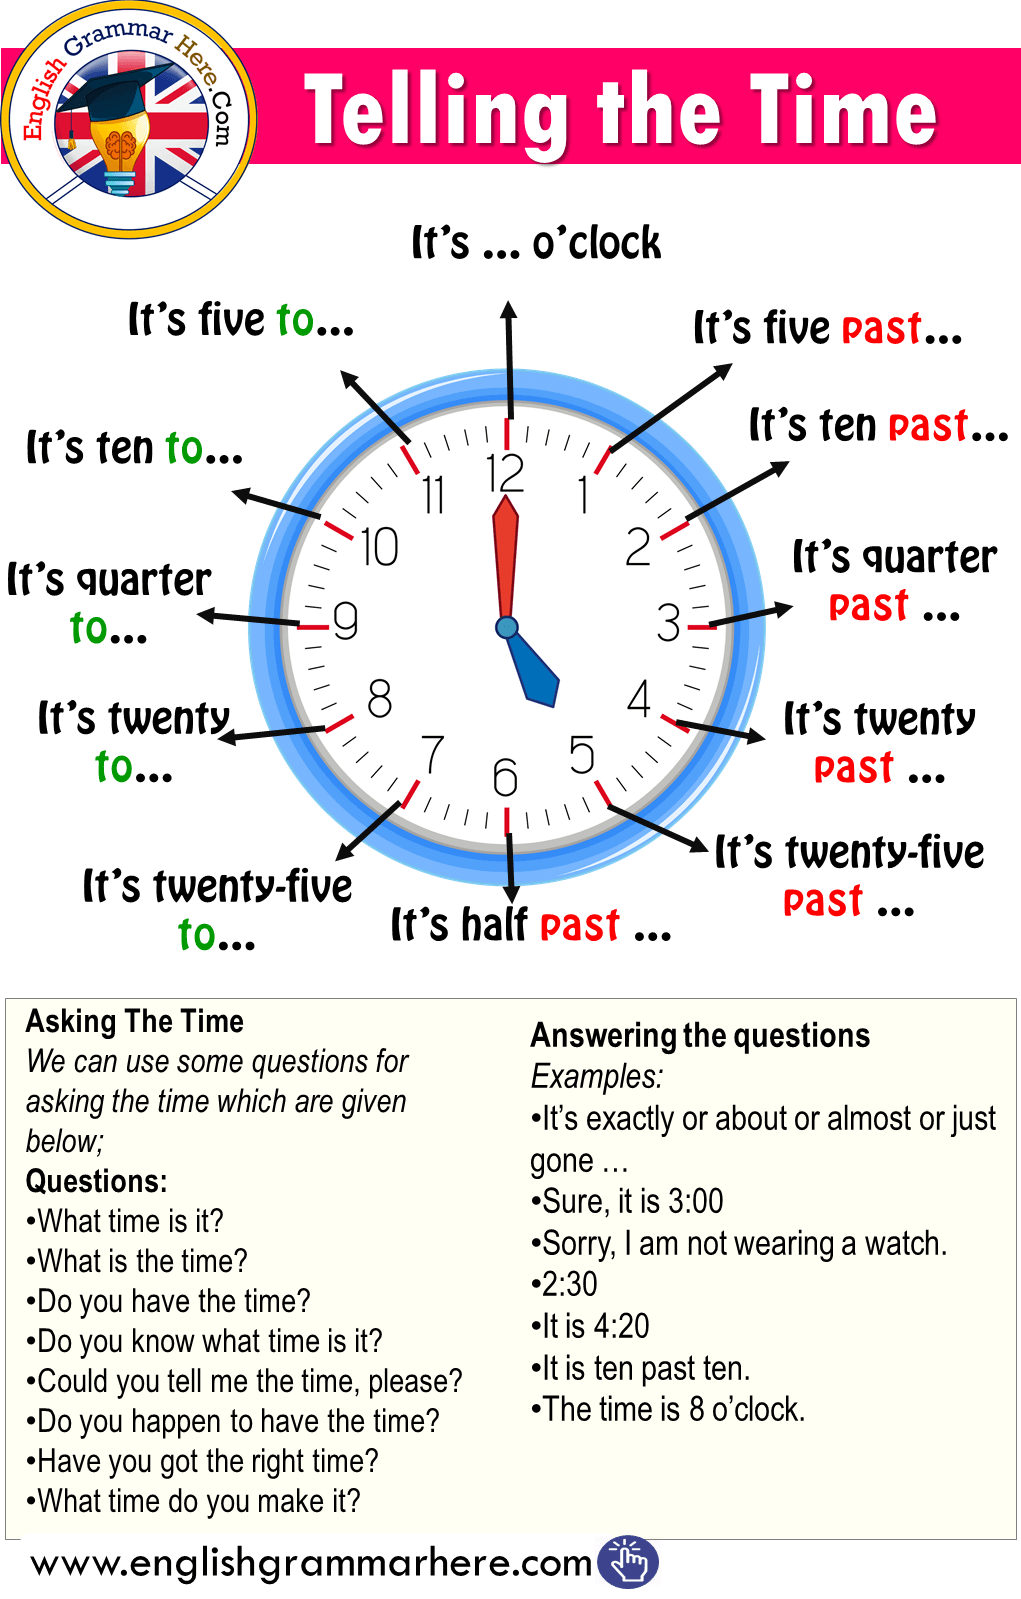 Telling The Time In English English Grammar Here